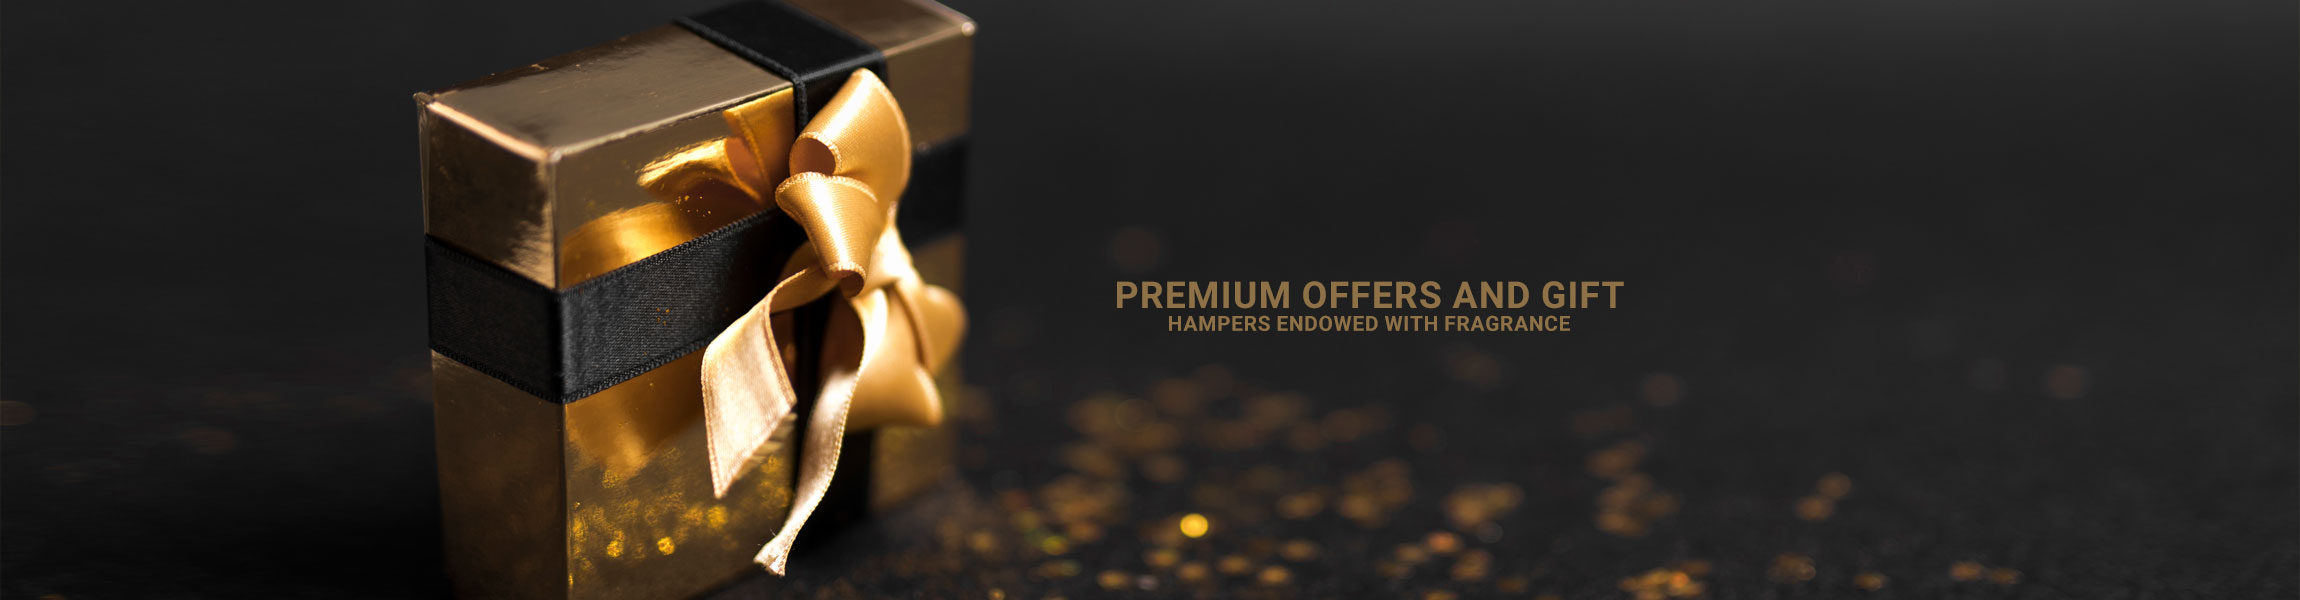 Premium Offers and Gift Hampers Endowed with Fragrance